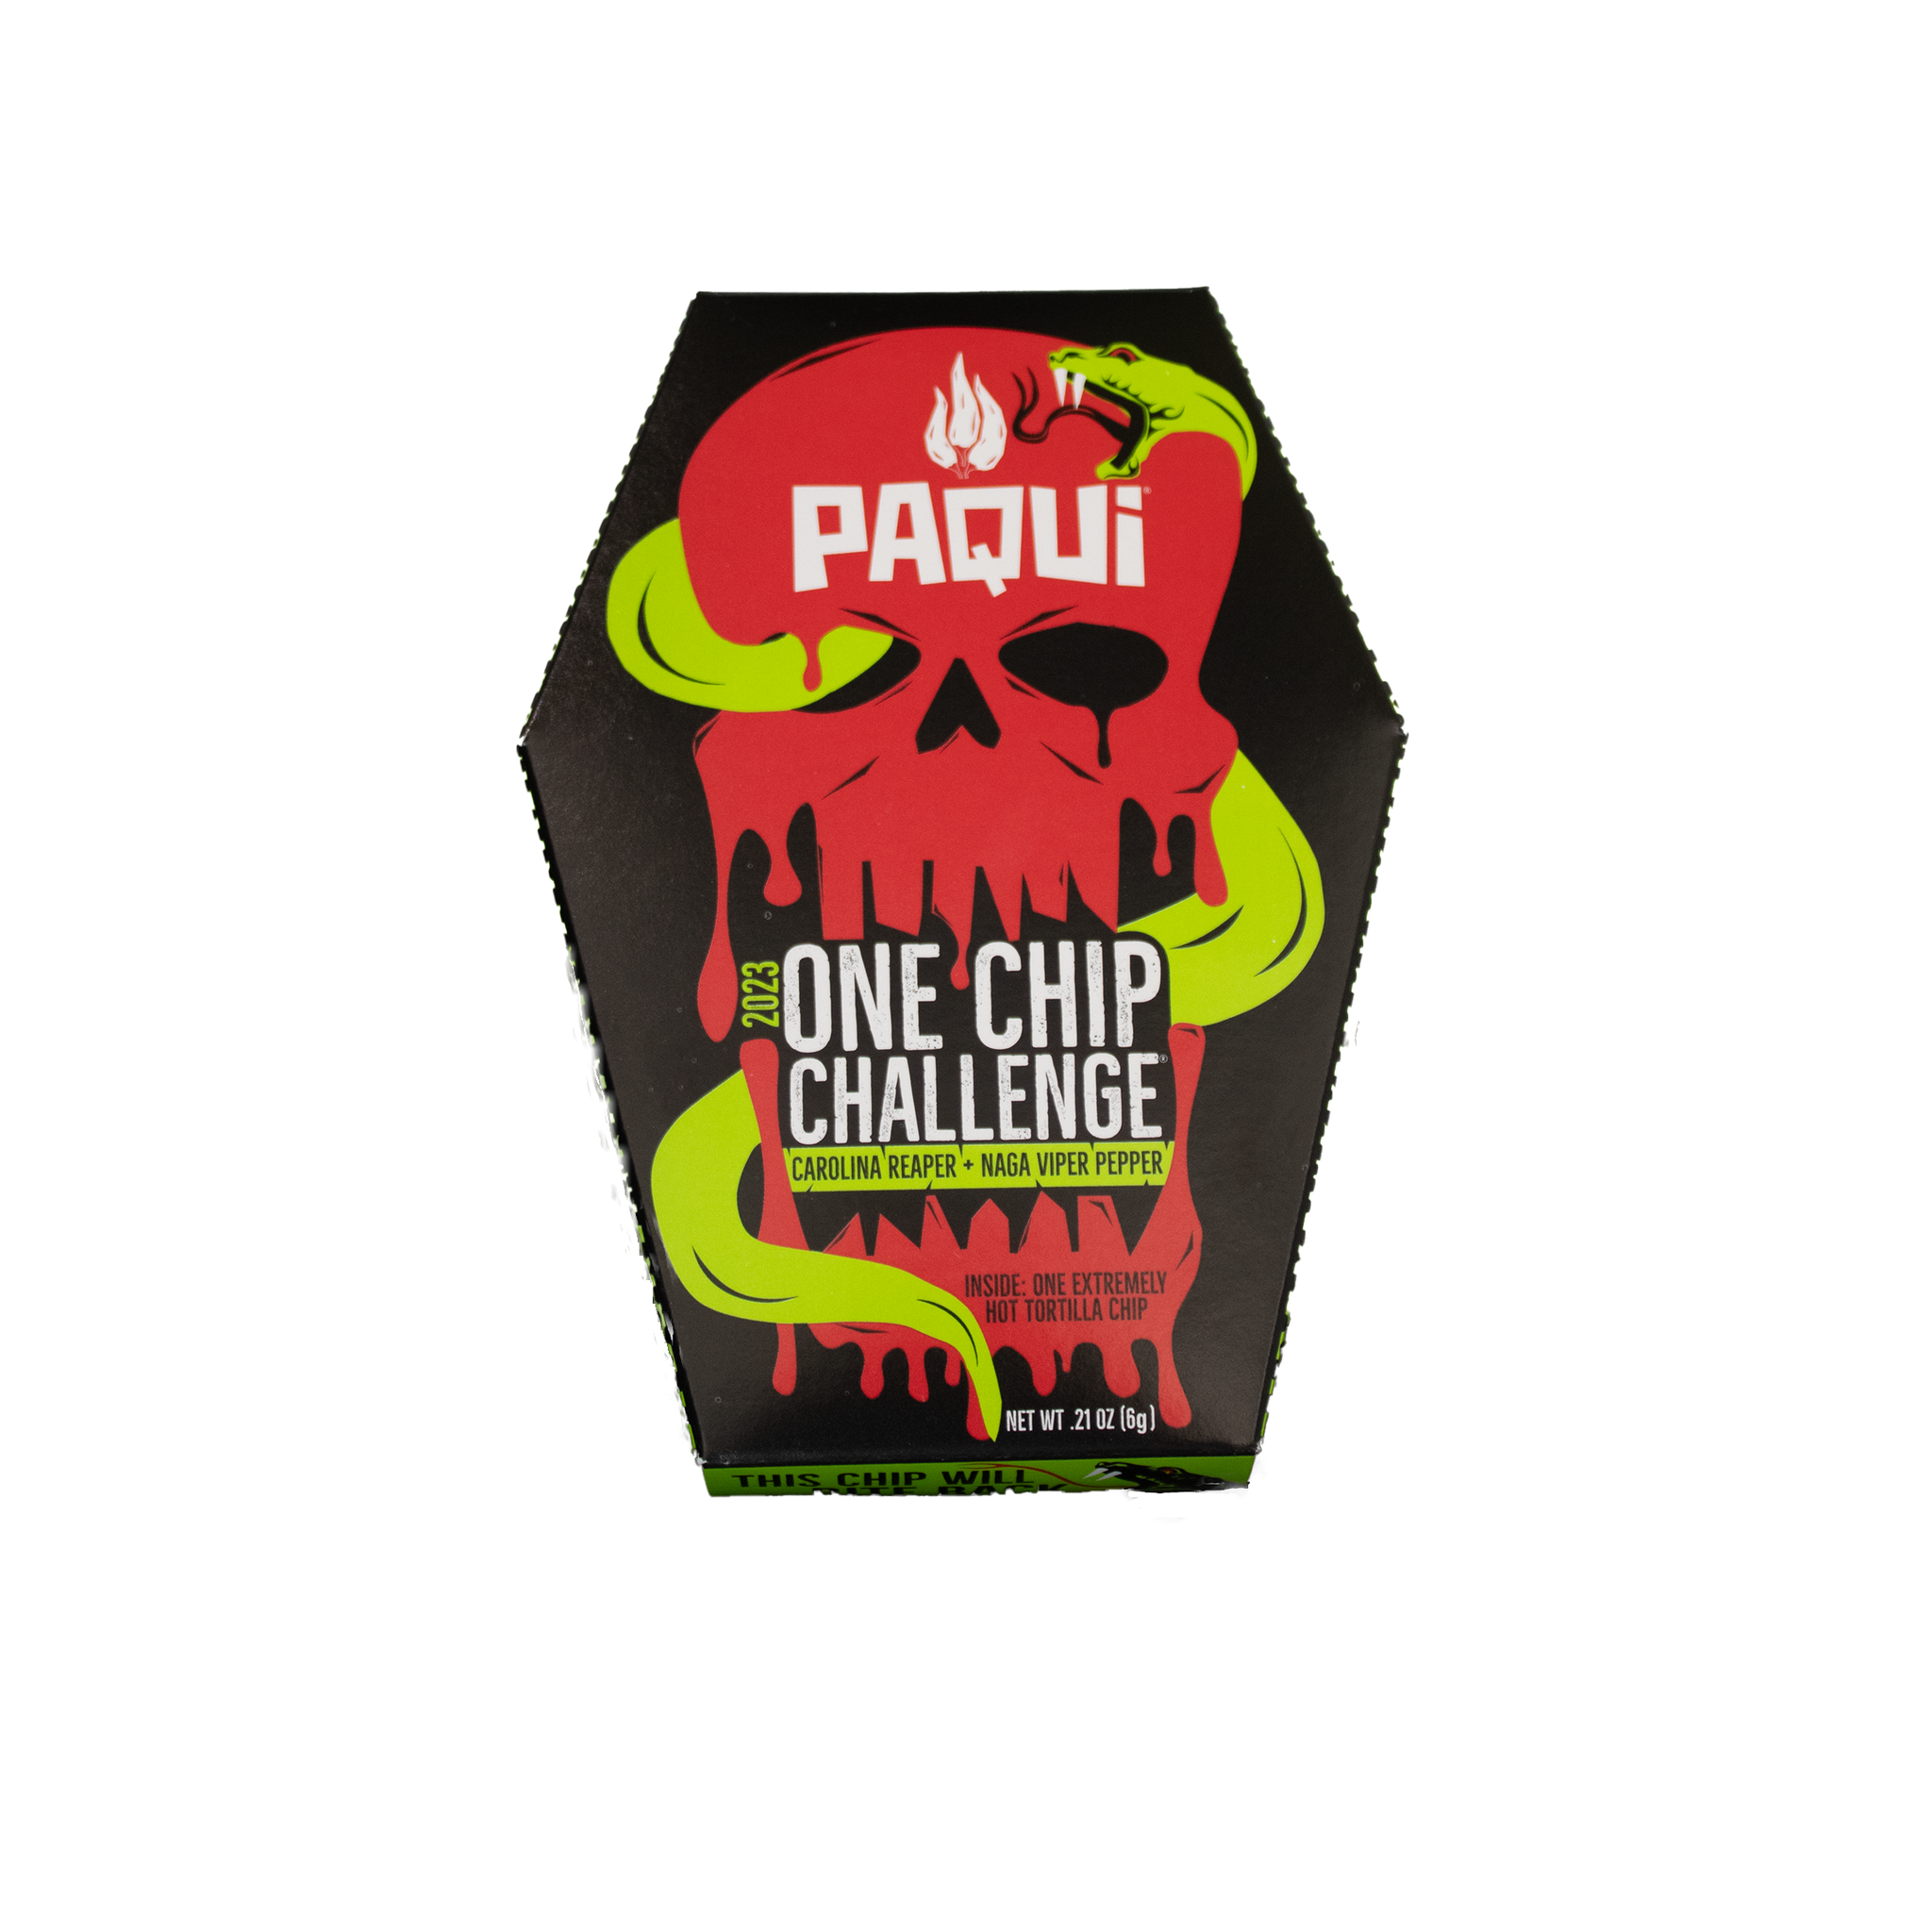 Has anyone seen the 2023 Paqui One-Chip Challenge at a store here in  Saskatoon? : r/saskatoon